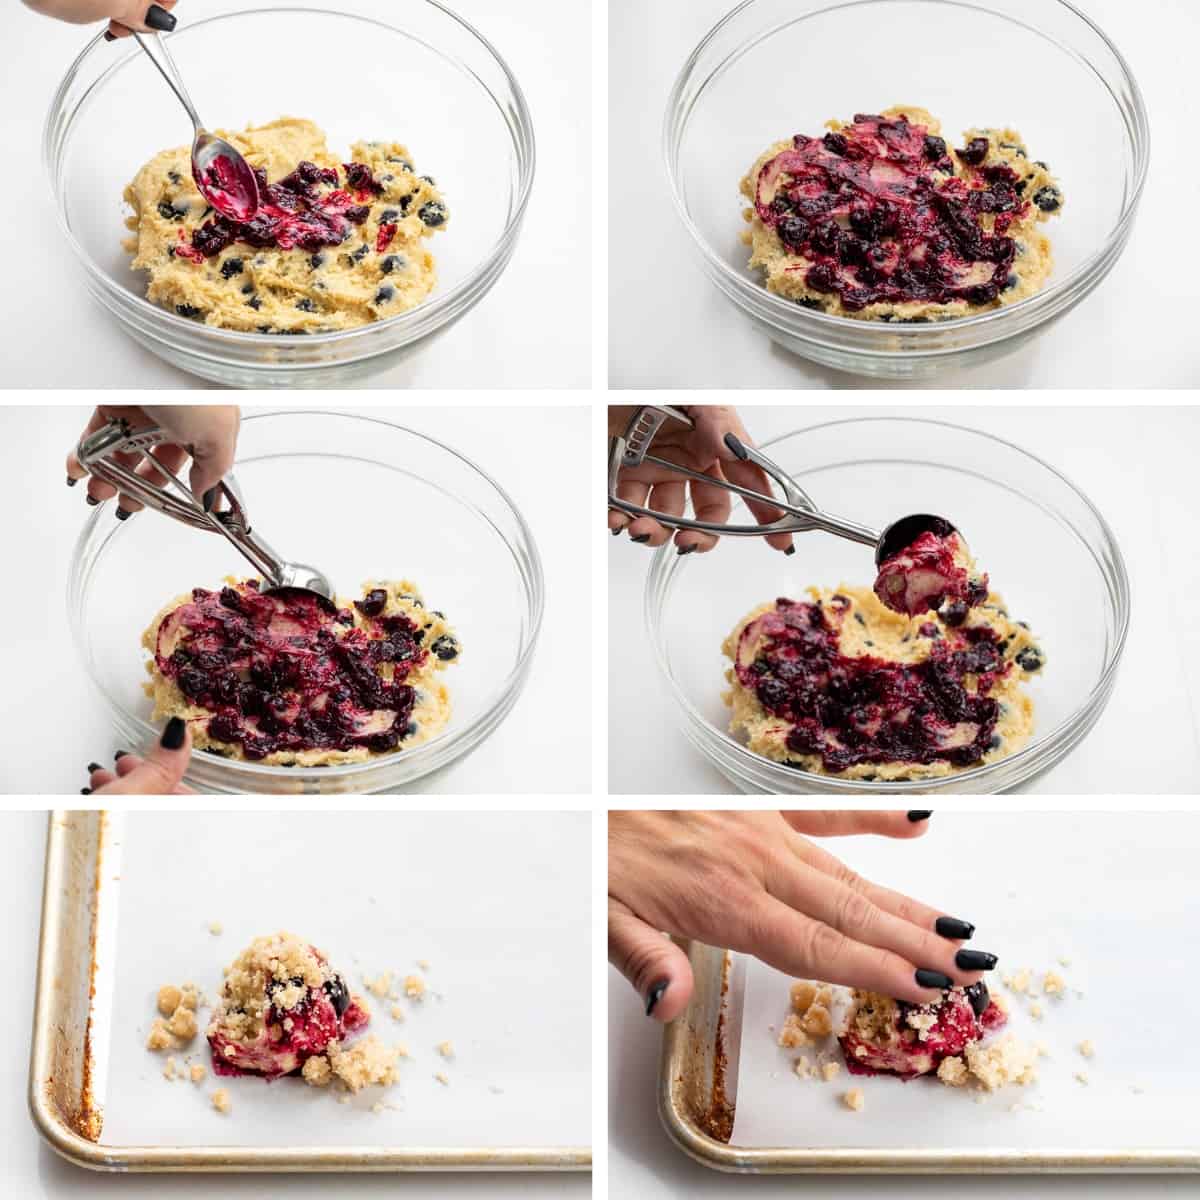 Steps for Making Blueberry Crumble Cake Cookies with Dough and Blueberry Sauce.